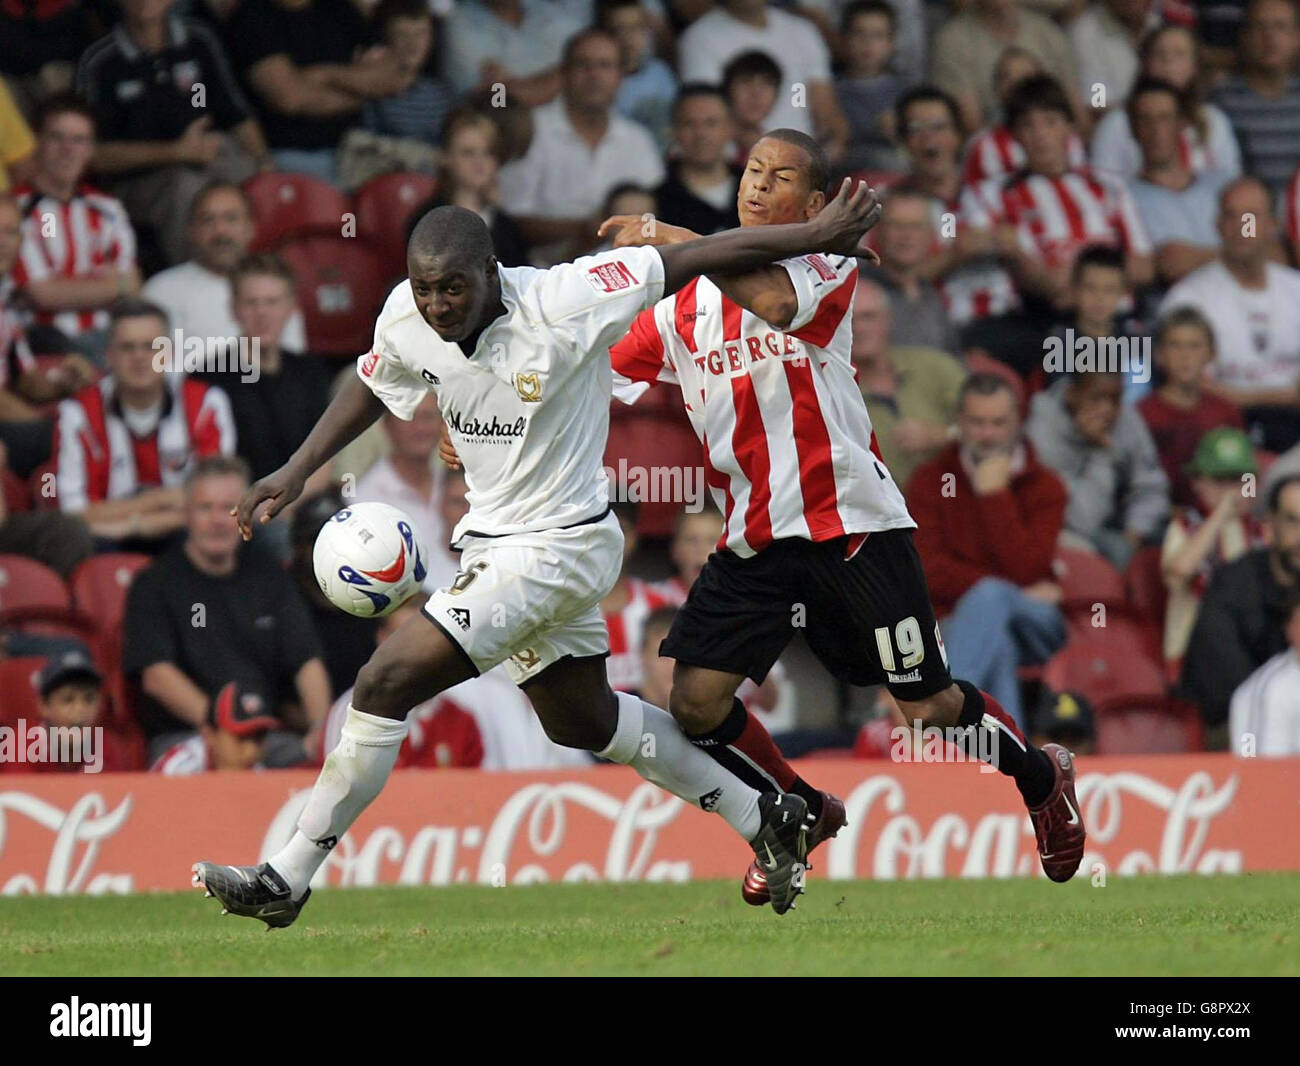 Milton Keynes Dons' Pablo Mills (L) holds off the challenge of Brentford's DJ Campbell during the Coca-Cola League One match at Griffin Park, Brentford, Saturday September 10, 2005. PRESS ASSOCIATION Photo. Photo credit should read: Steve Bardens/PA NO UNOFFICIAL CLUB WEBSITE USE. Stock Photo